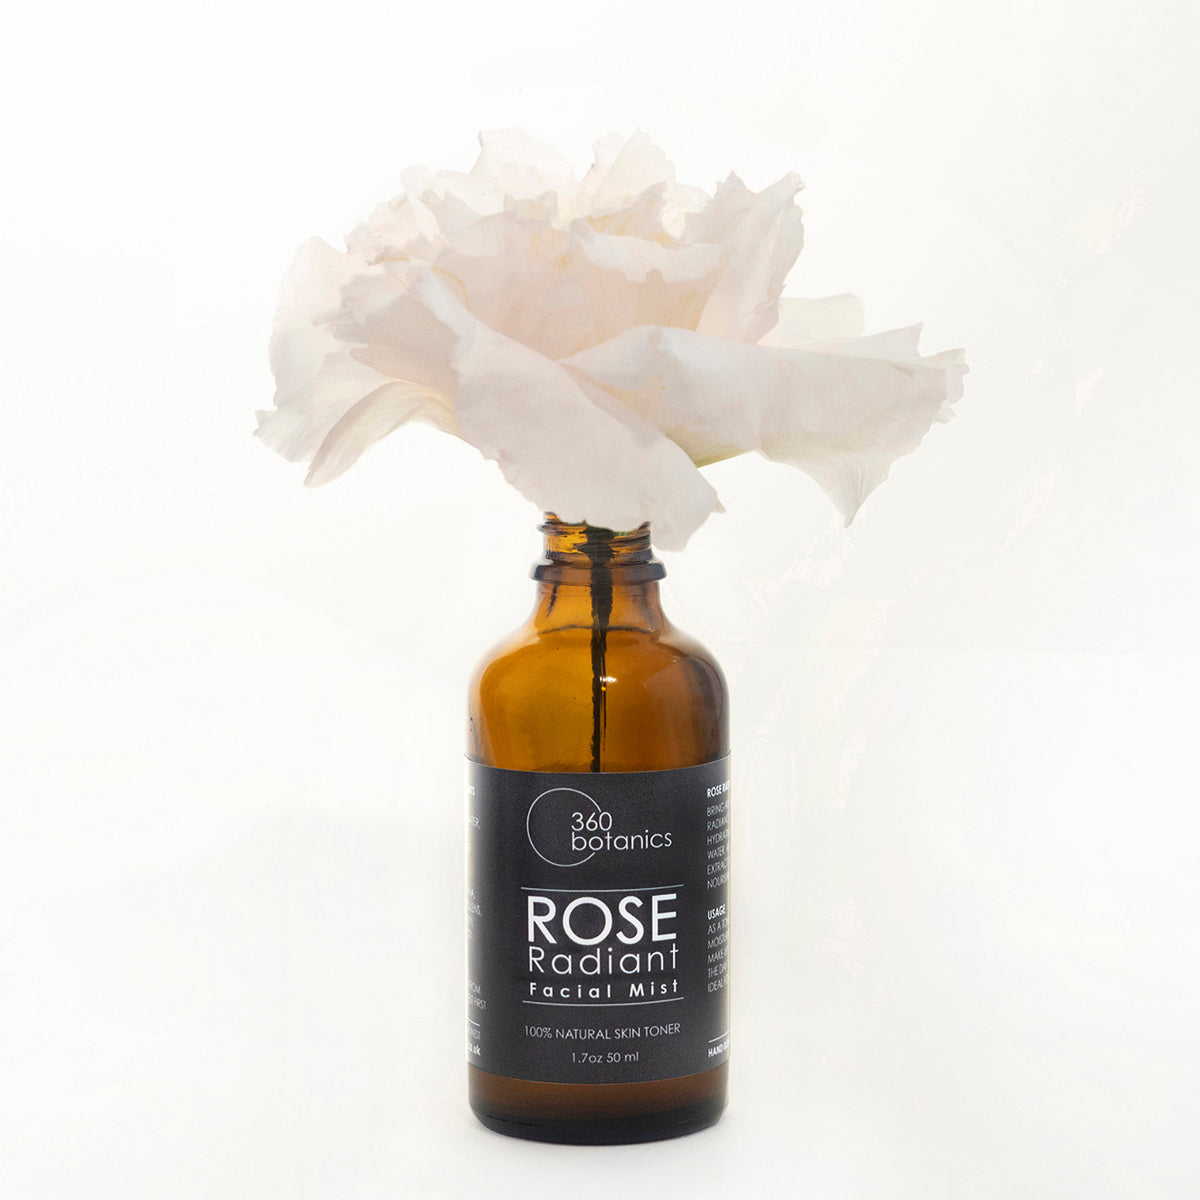 A bottle of 360 Botanics Rose Radiant Facial Mist labeled as 100% natural skin toner in a 1.7 oz or 50 ml size, with a single large white rose flower emerging from the top, set against a white background.